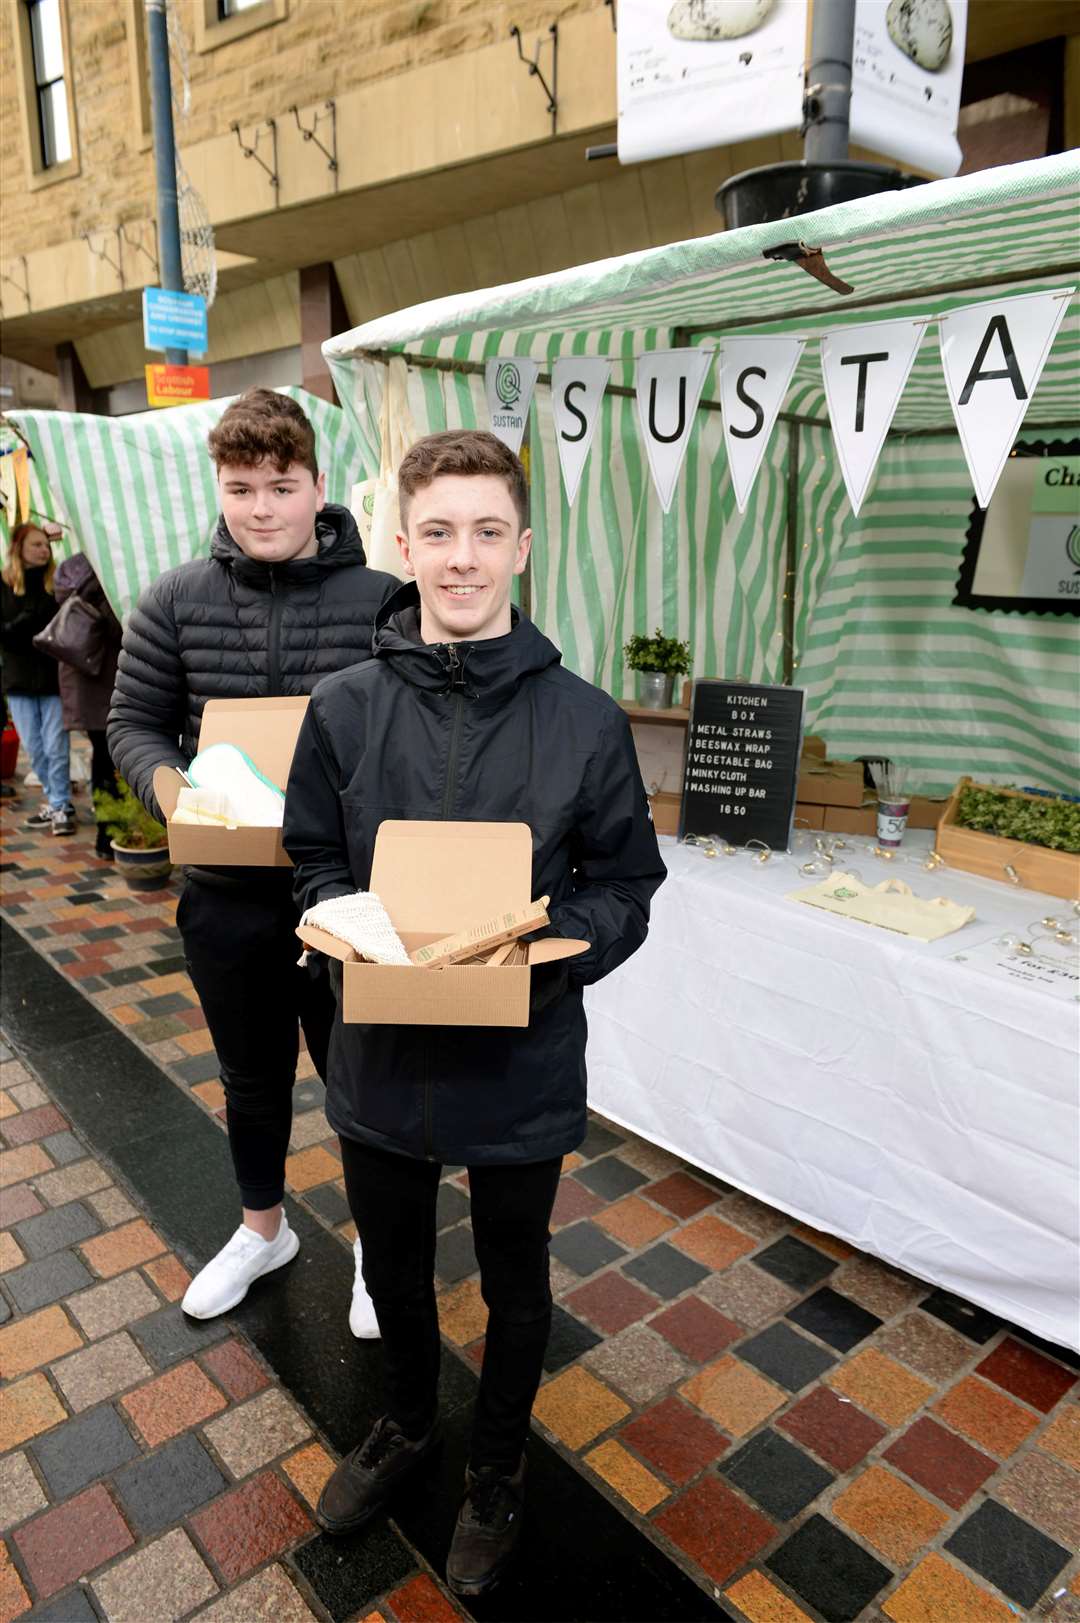 Calum Daun and Grant Nixon from Inverness Royal Academy were selling a range of sustainable products.